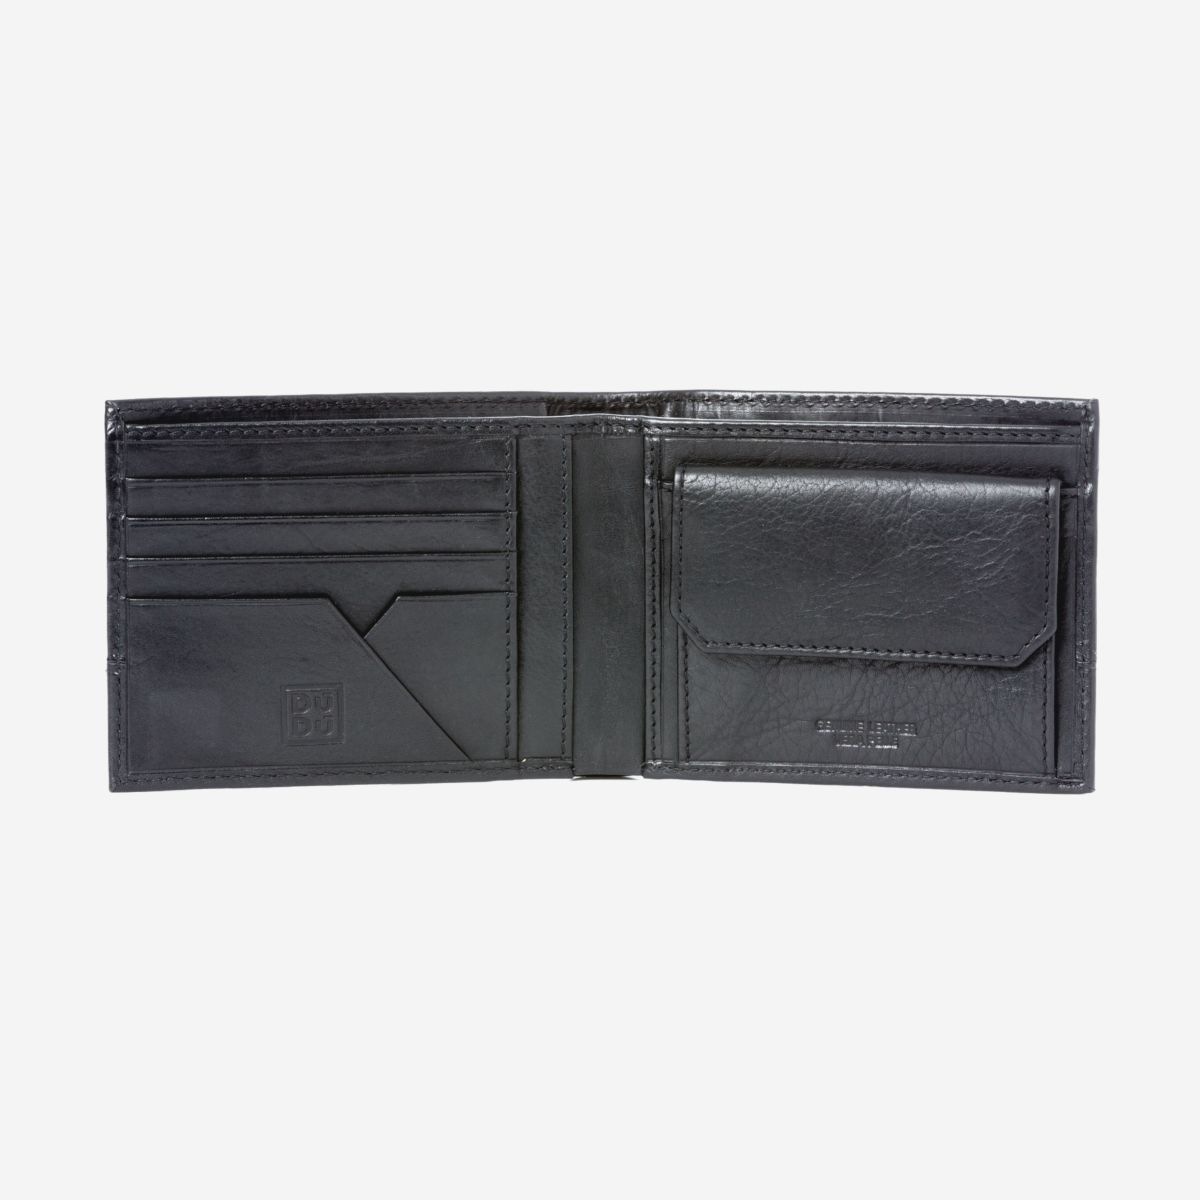 DuDu Mens Leather Wallet with Coin Pocket - Black